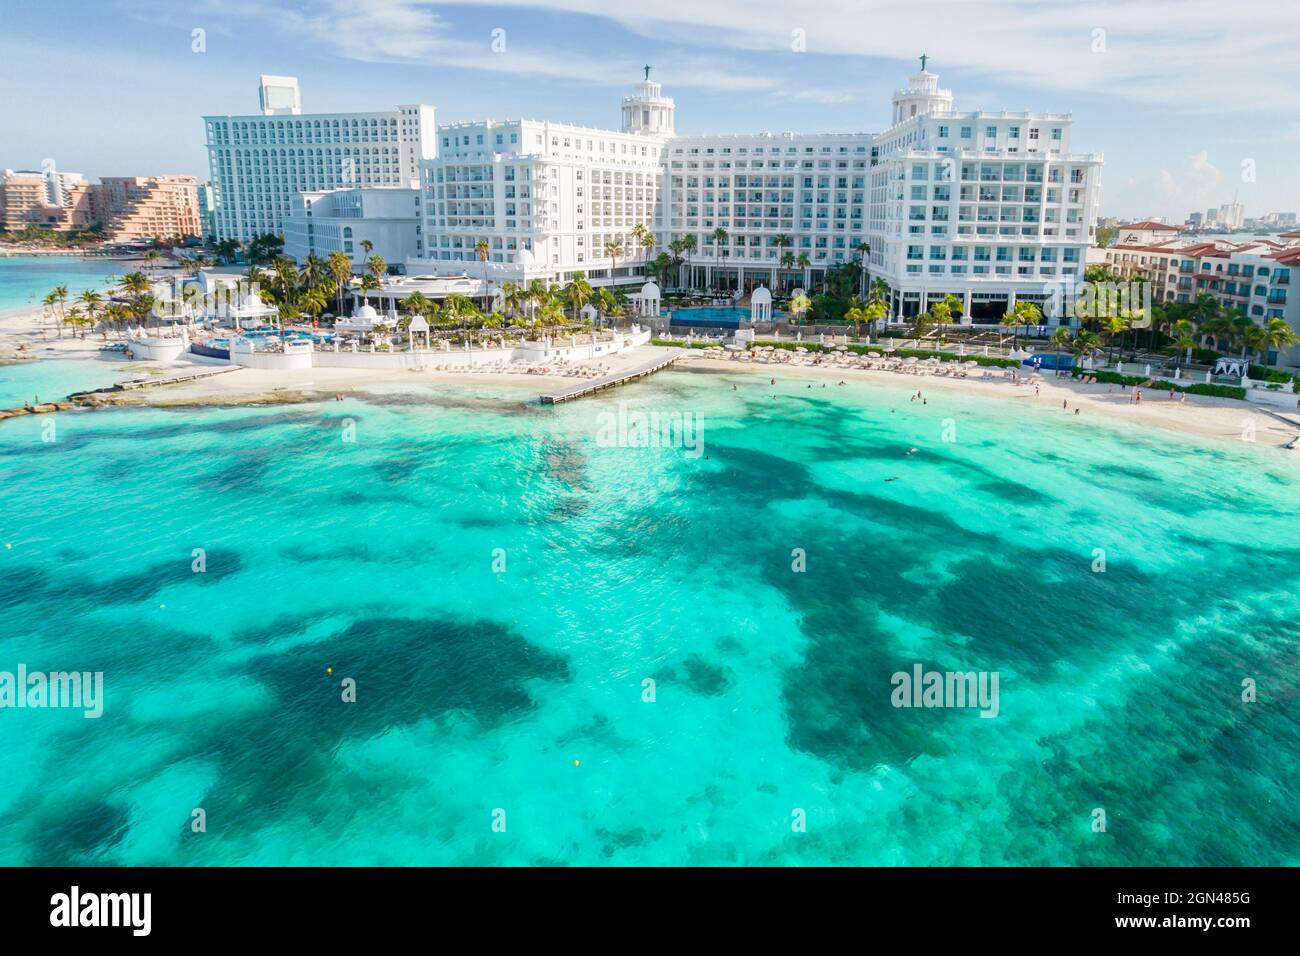 Cancun, Mexico - September 17, 2021: View of beautiful Hotel Riu Palace Las  Americas in the hotel zone of Cancun. Riviera Maya region in Quintana roo  Stock Photo - Alamy